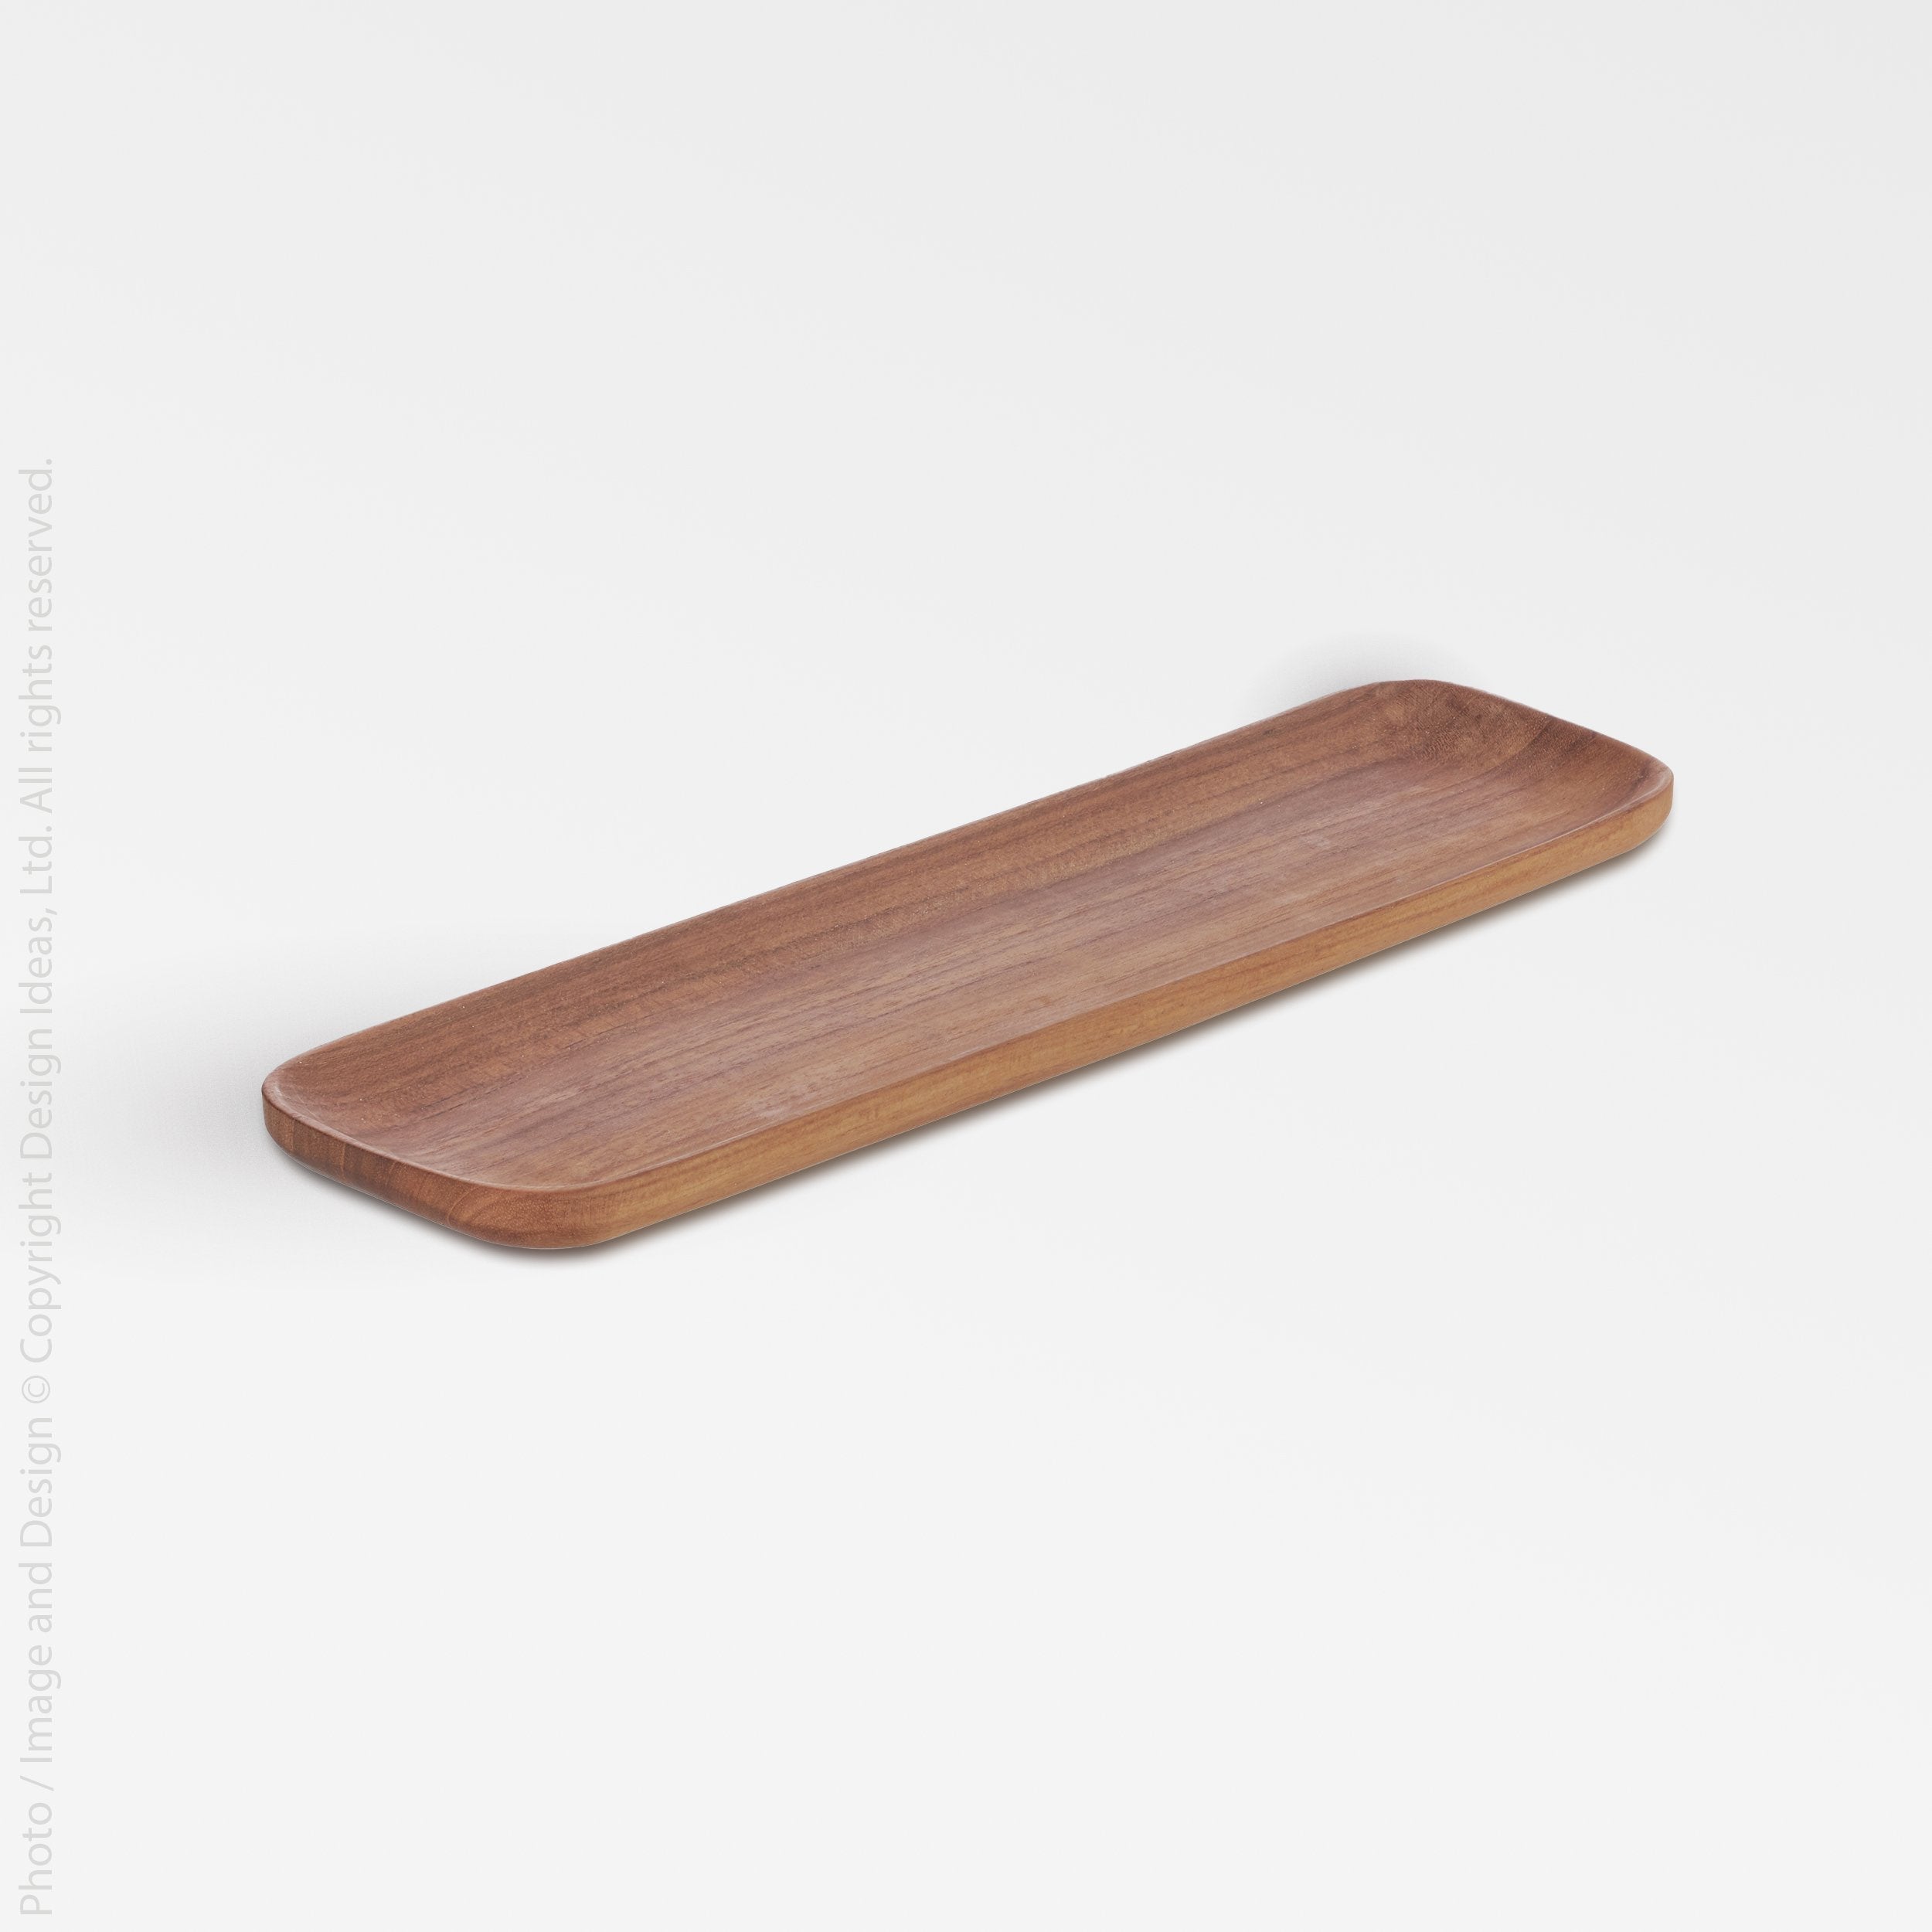 Chiku Teak Platter - Natural Color | Image 1 | From the Chiku Collection | Masterfully crafted with natural teak for long lasting use | This platter is sustainably sourced | Available in natural color | texxture home